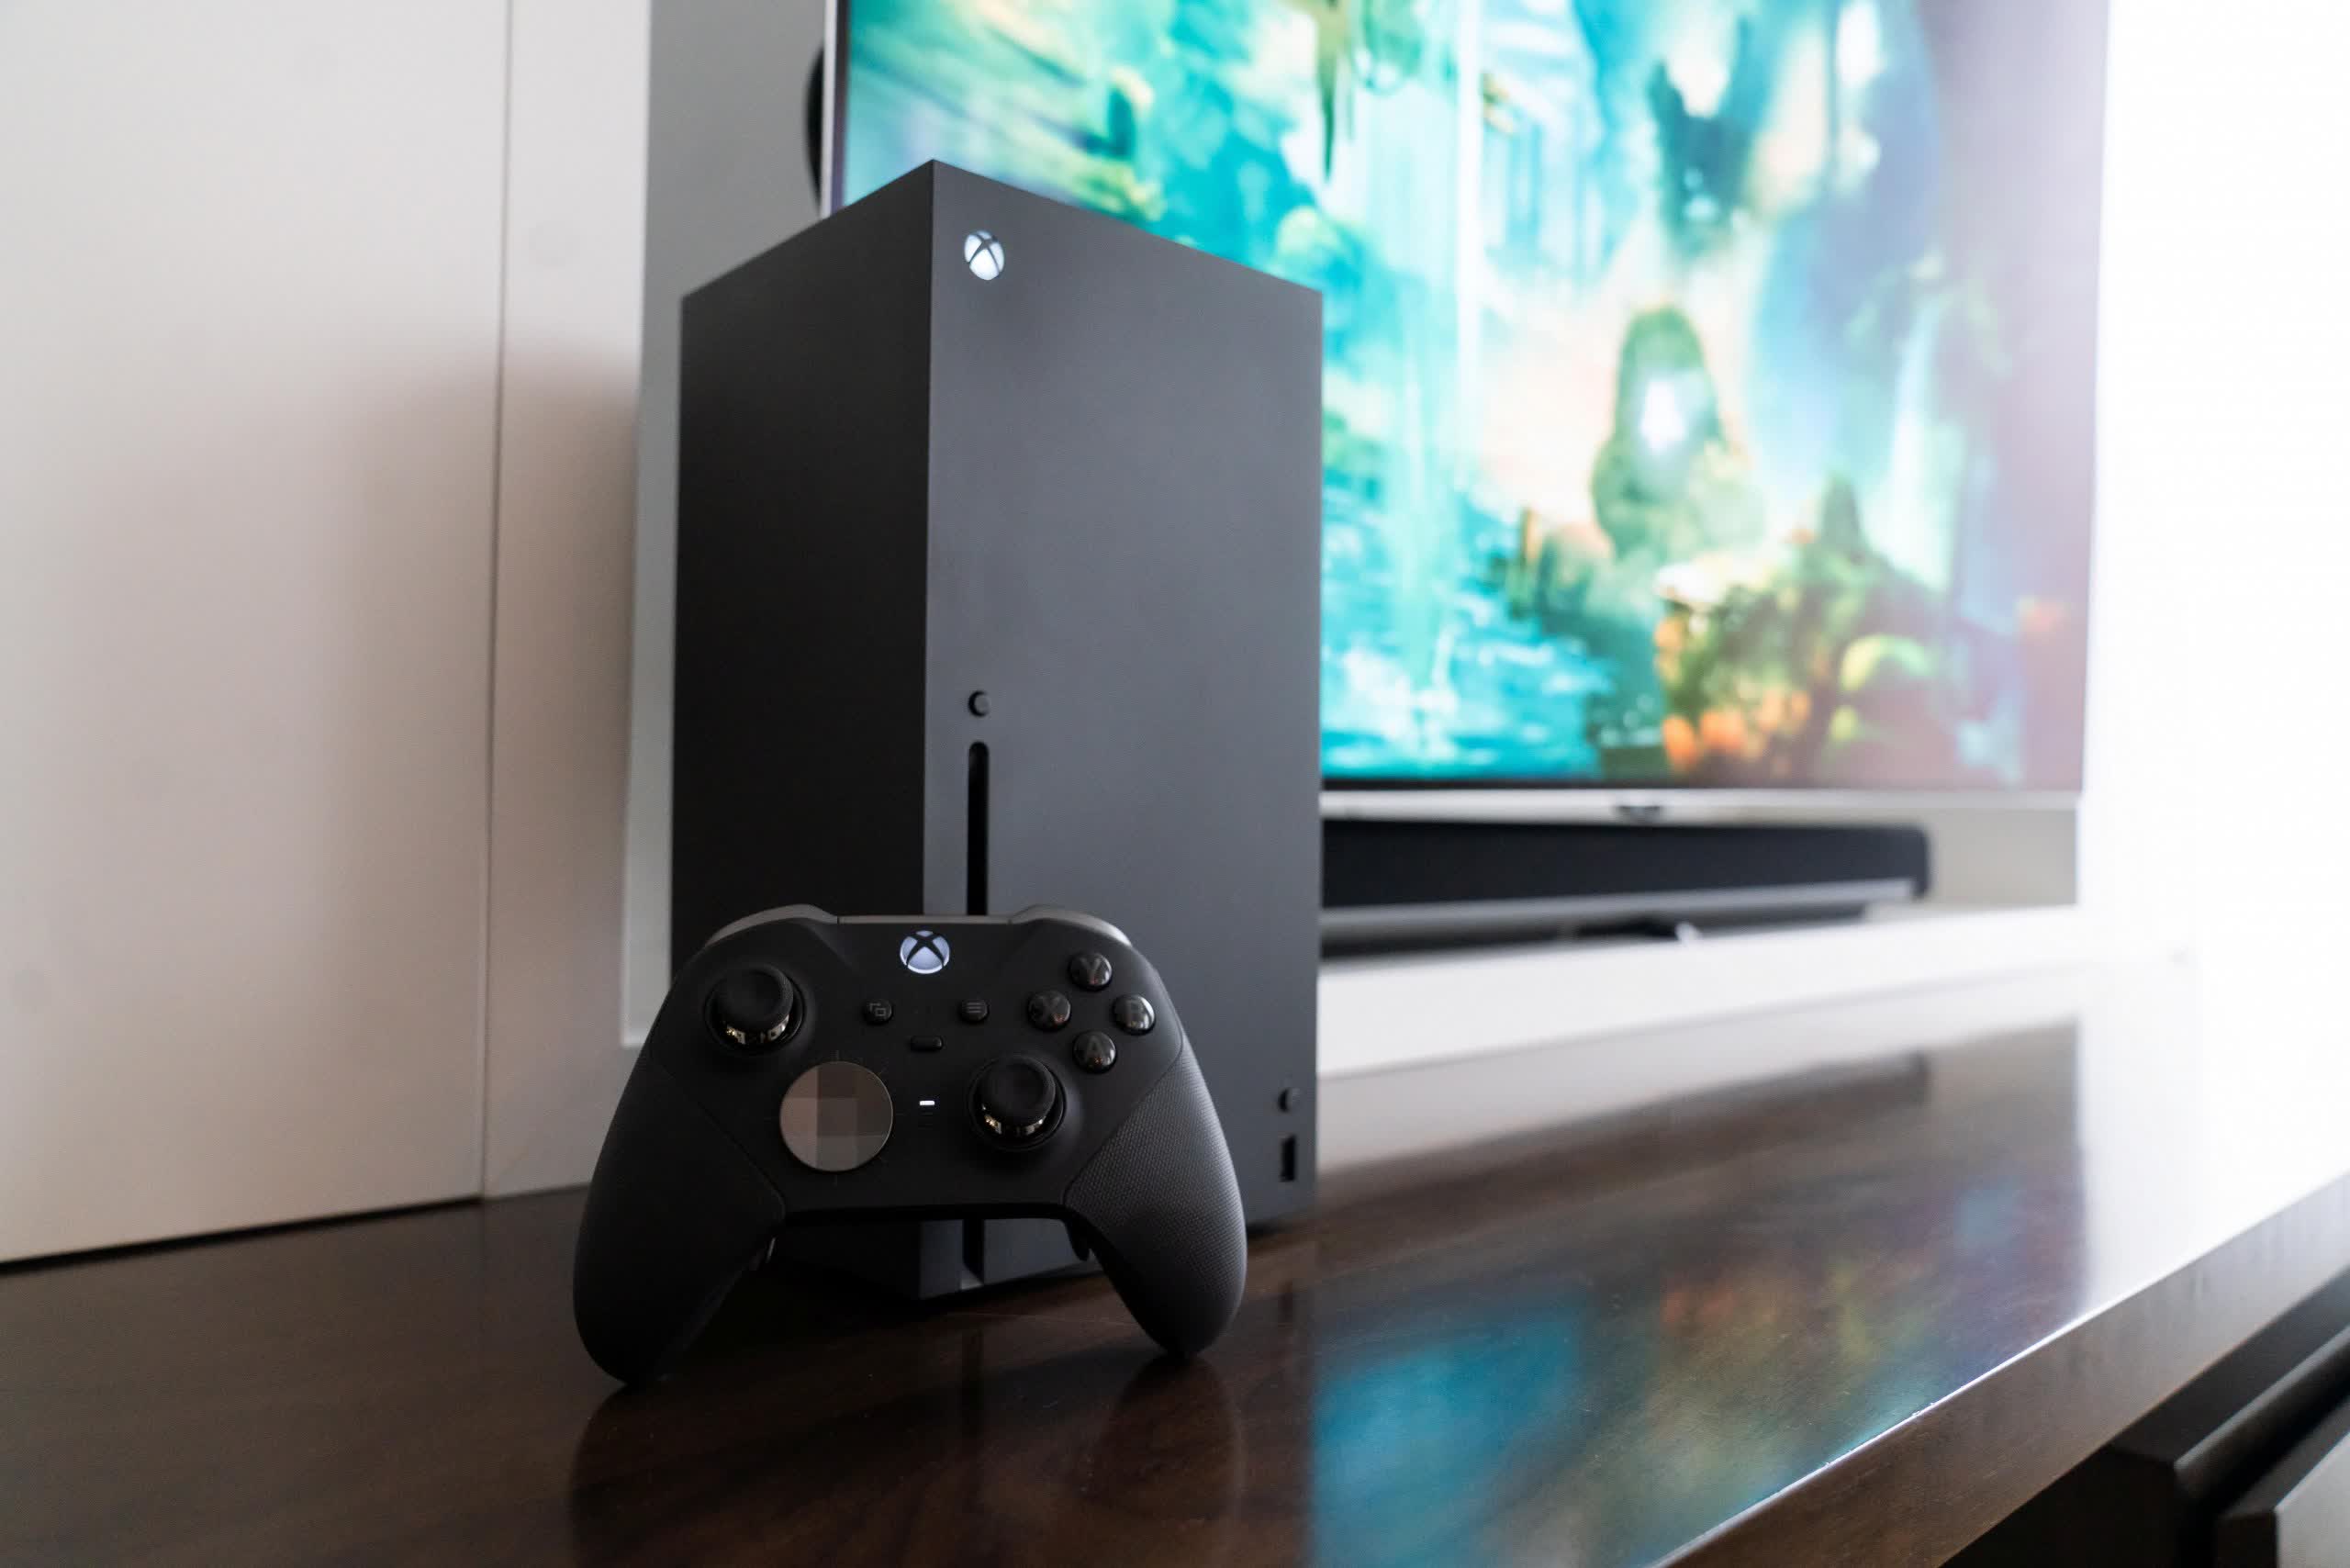 Phil Spencer says Microsoft is cranking out as many next-gen consoles as it can